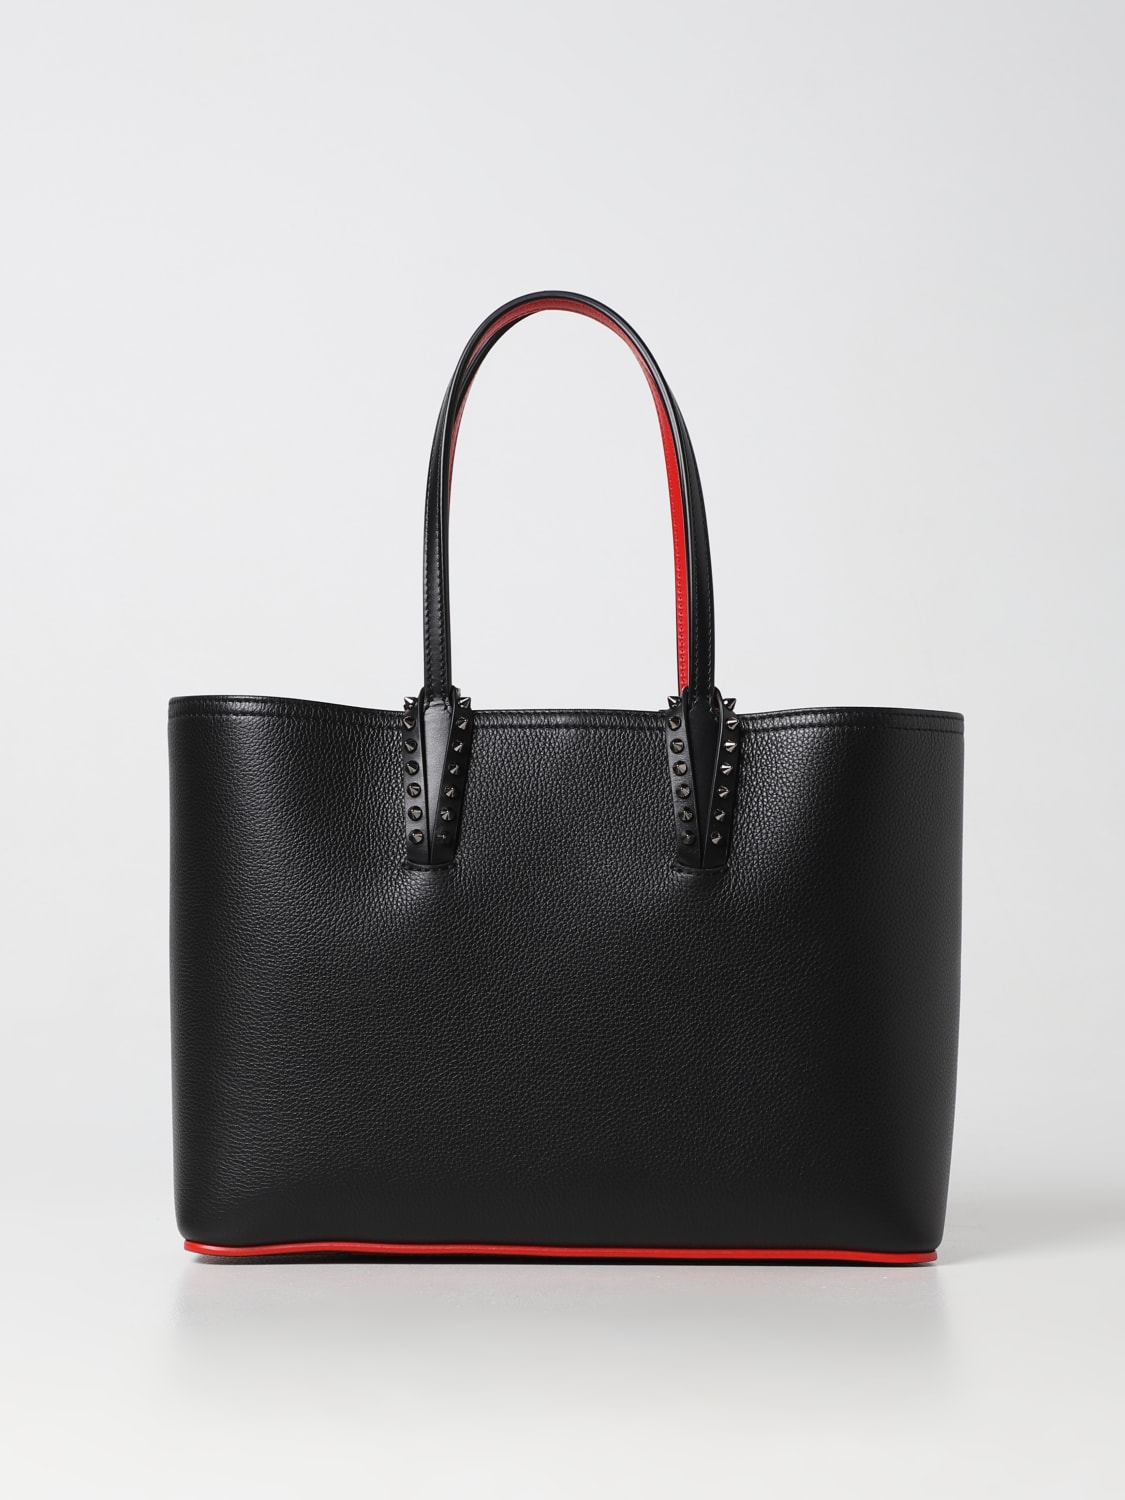 CHRISTIAN LOUBOUTIN: Cabata bag in grained leather - Black | Christian ...